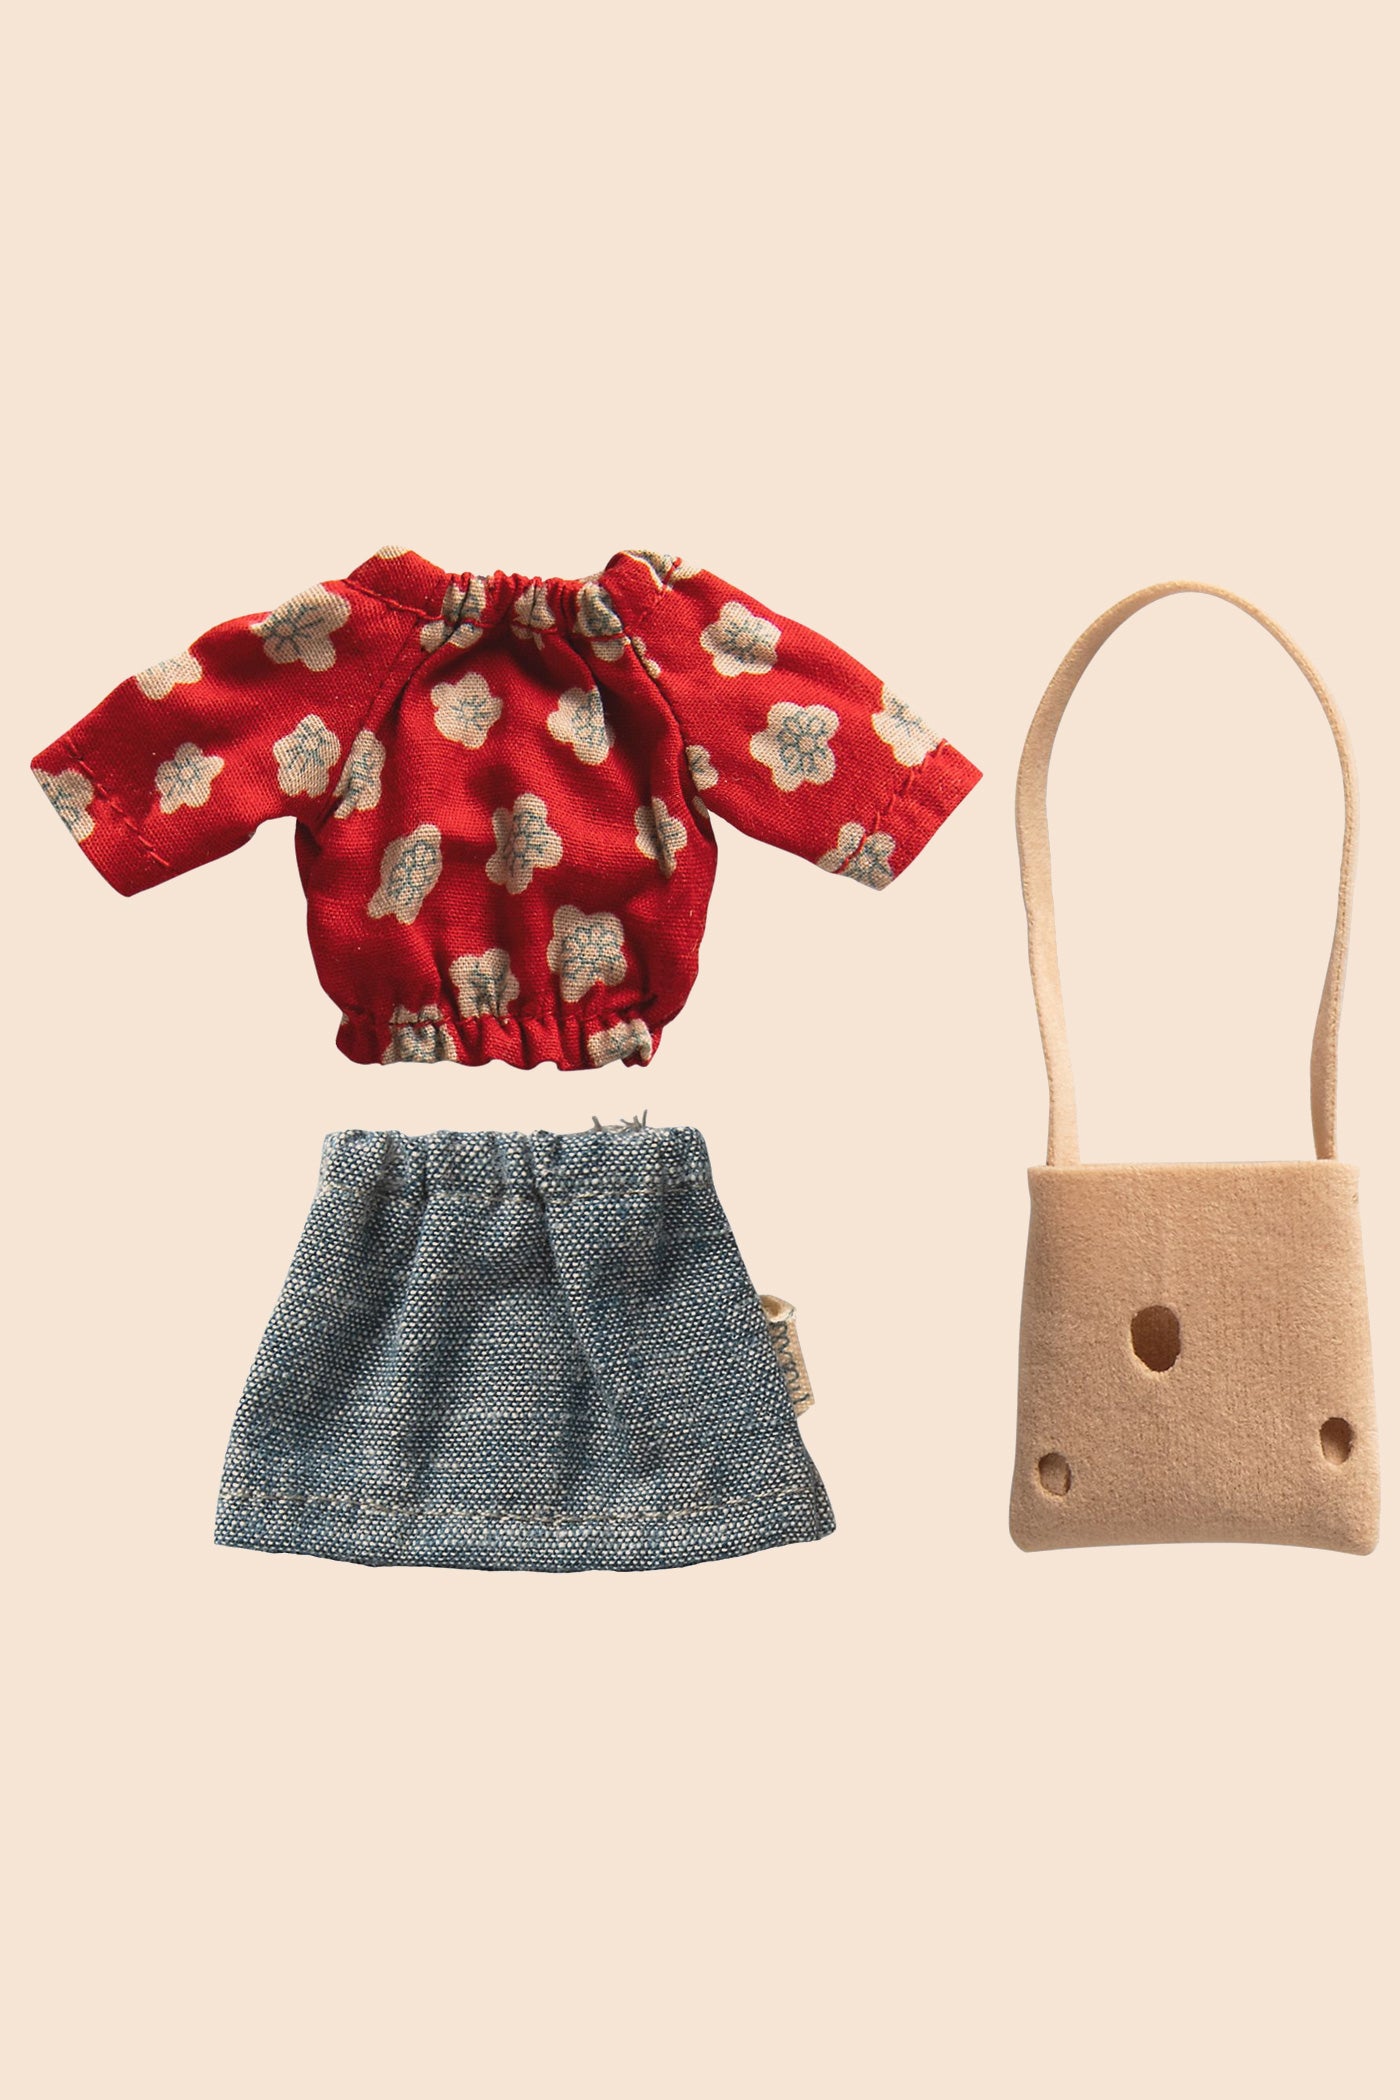 Maileg Mum Clothes for Mouse - Red flowery top, denim skirt and beige handbag